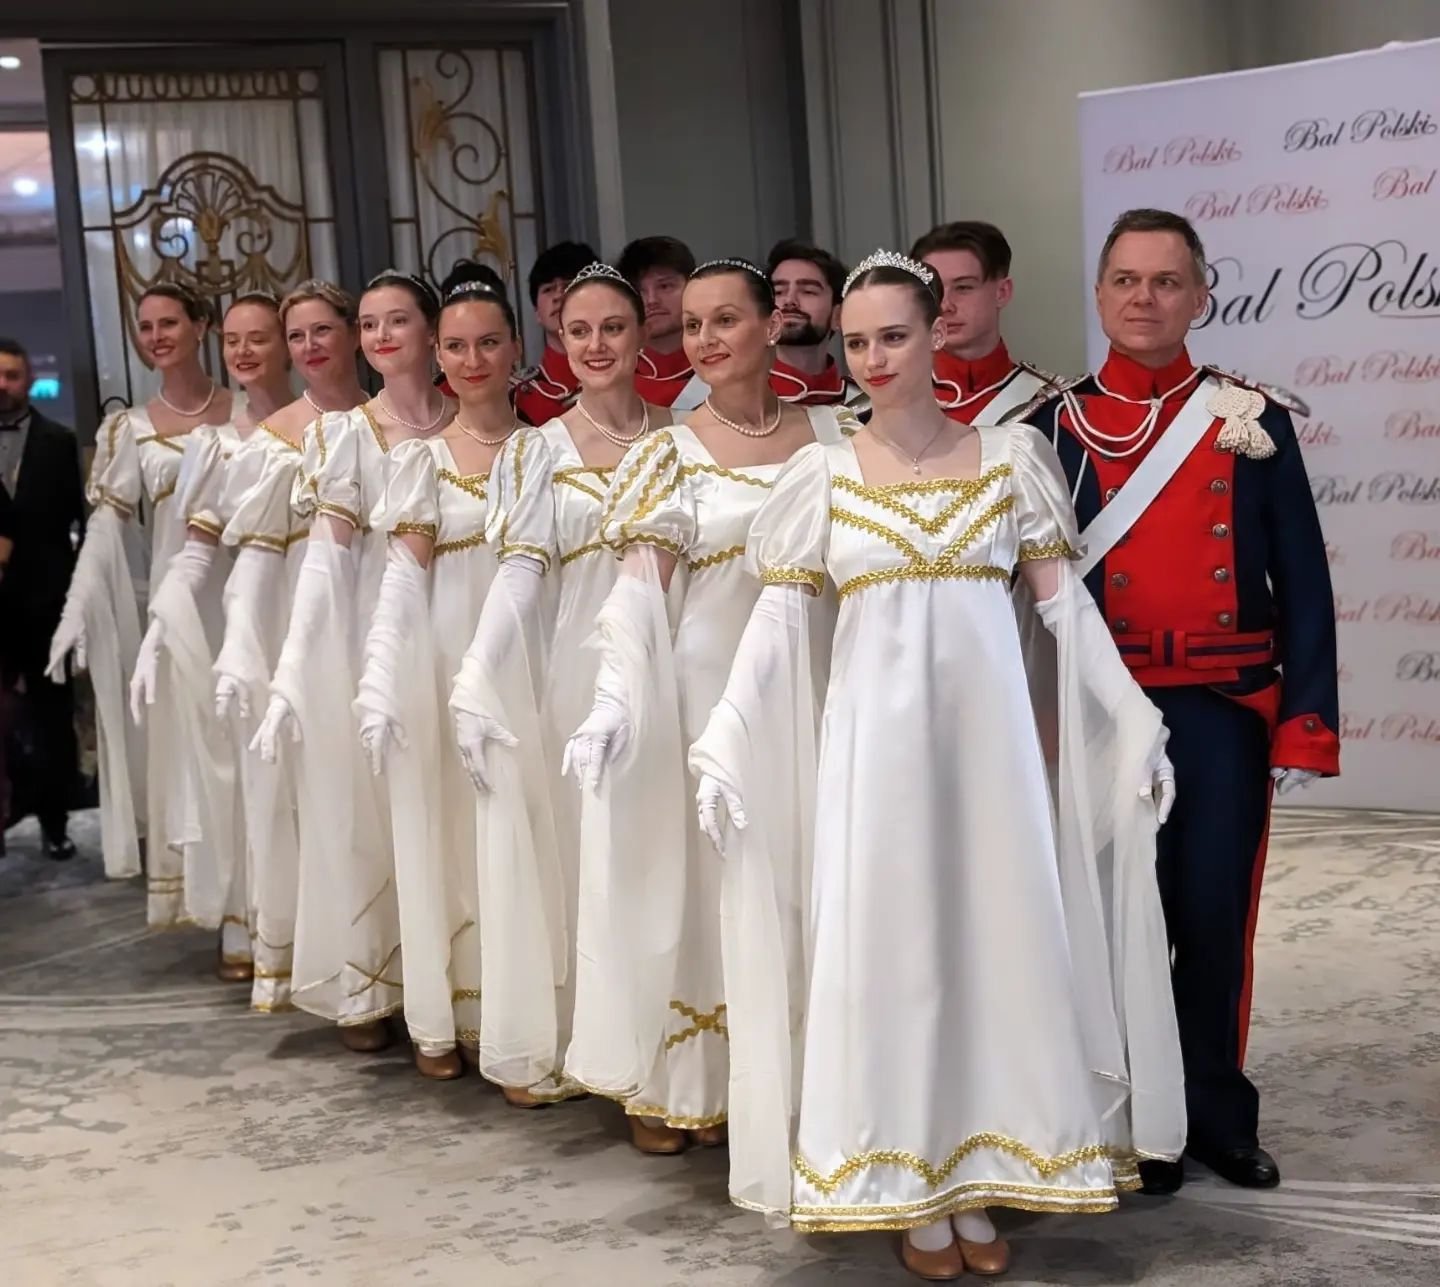 Mazury had the honour of leading the Polonaise before performing the Mazur Ułański and dances from Nowy Sącz at the 52nd Bal Polski 🇵🇱

This year, the annual fundraising event took place at JW Marriott Grosvenor House Hotel, Park Lane. Thank you to